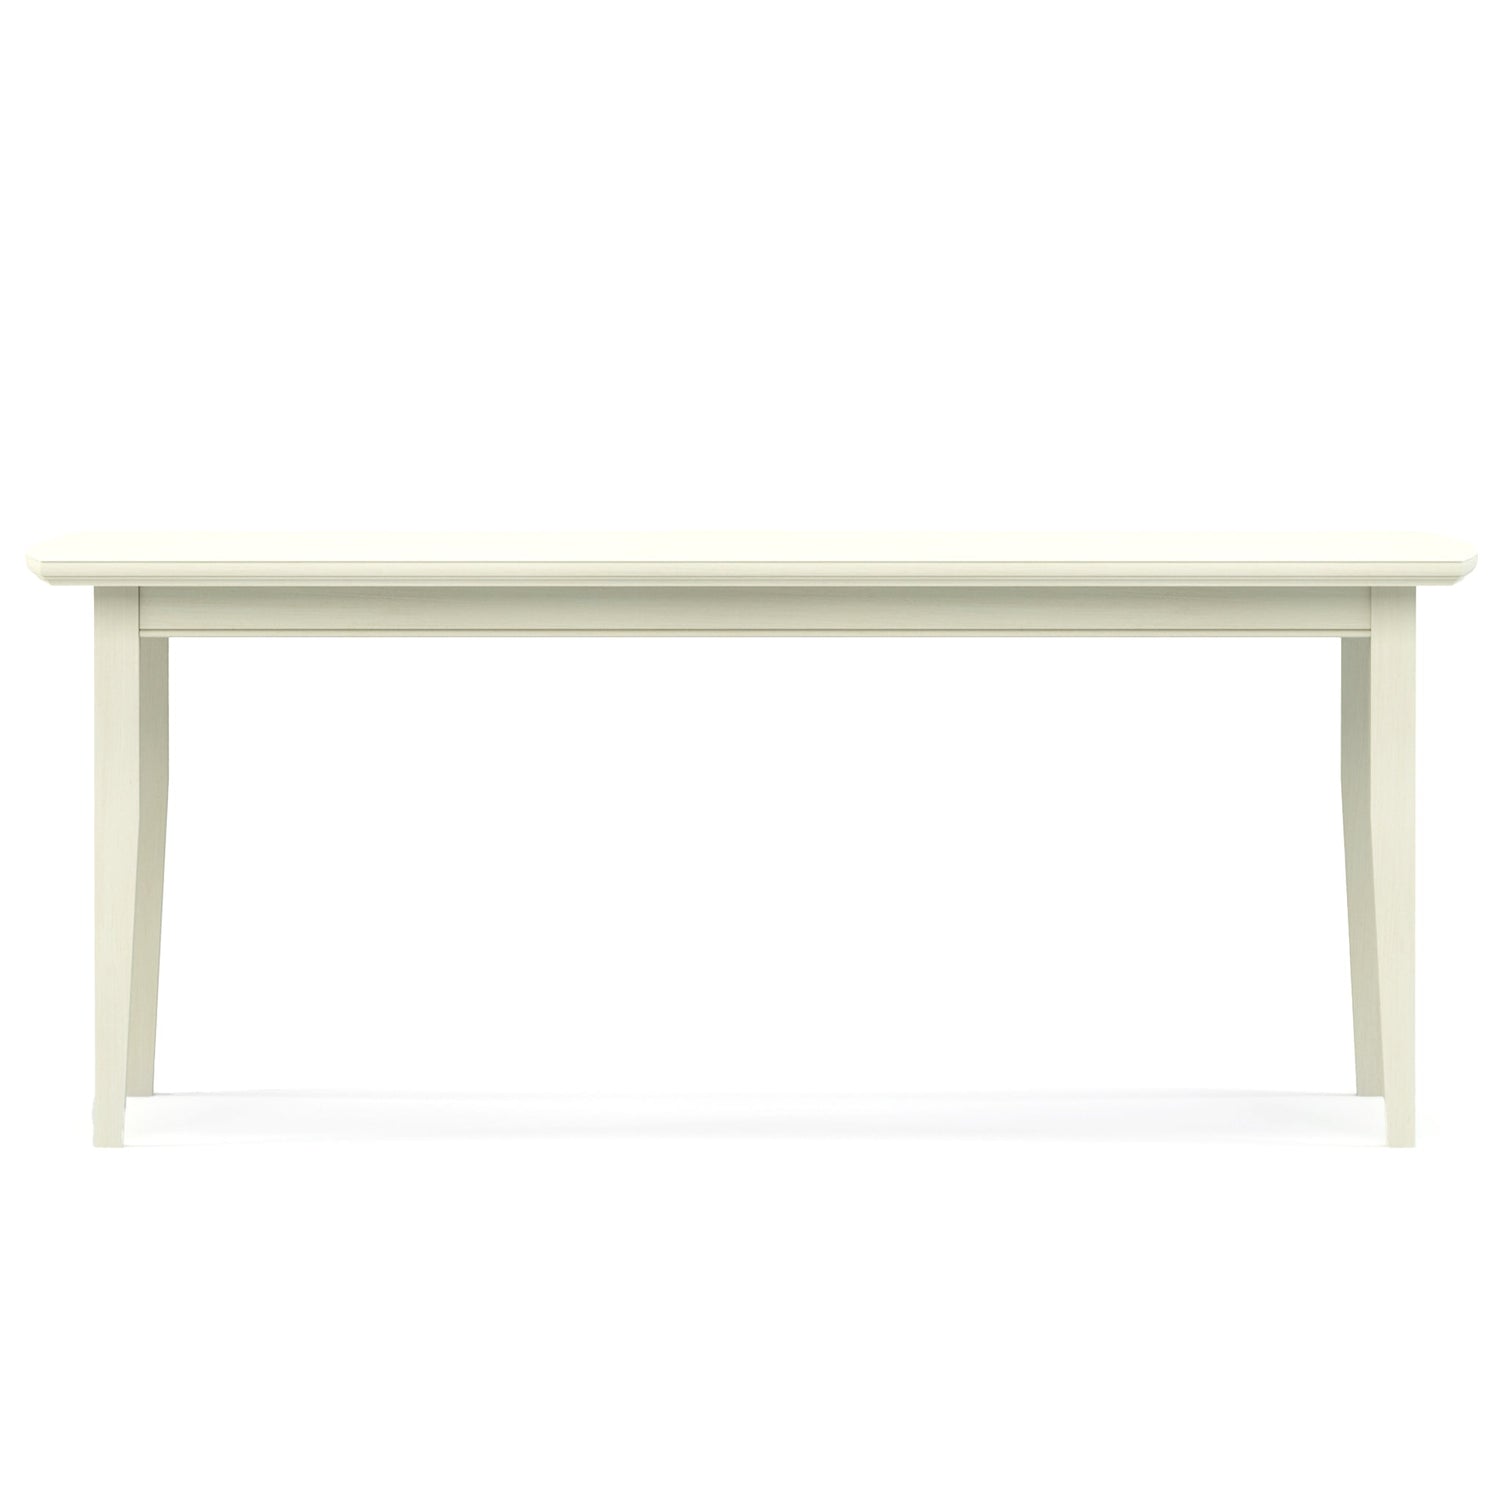 Revere 74-inch Dining Table